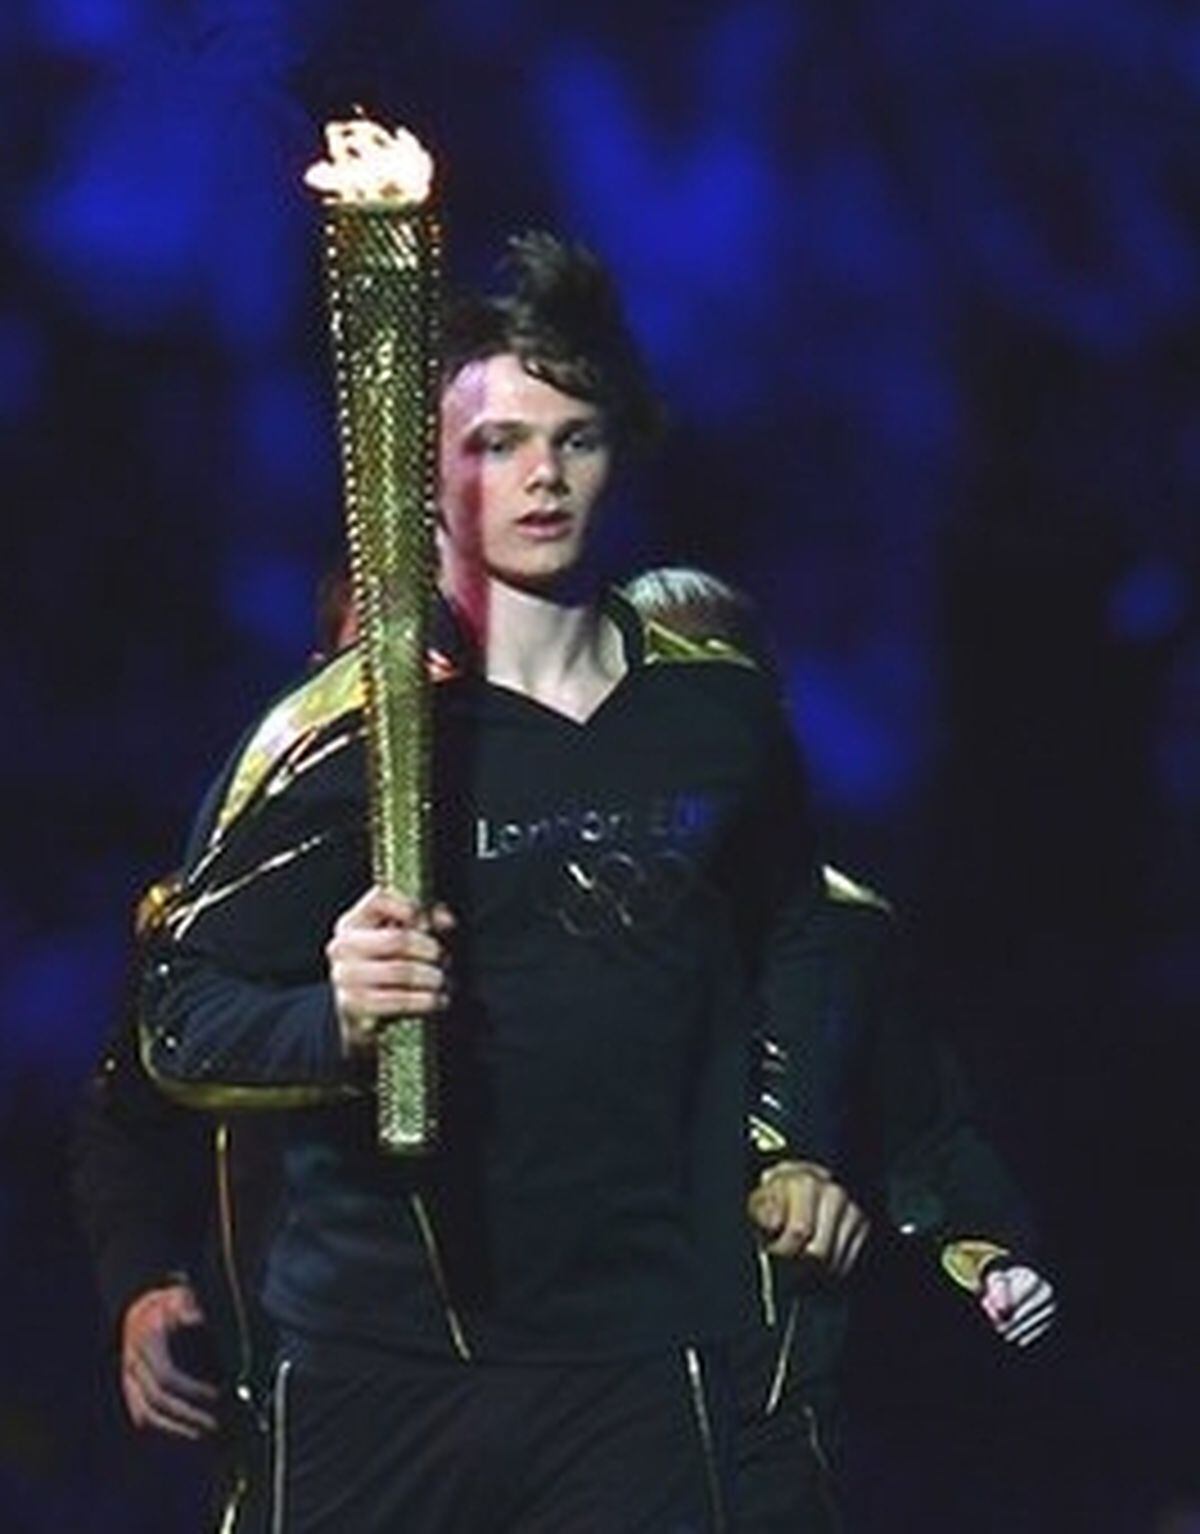 Aidan Reynolds carries the Olympic flame in the arena